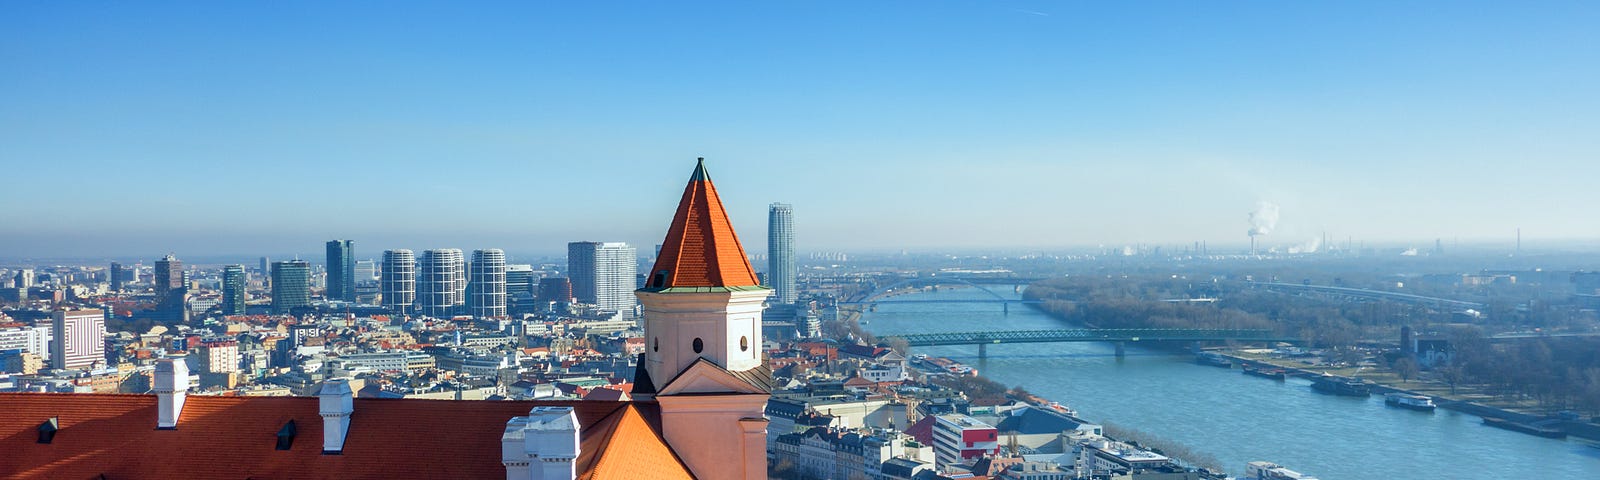 Bratislava (Slovakia) — View from the Crown Tower of the Bratislava Castle